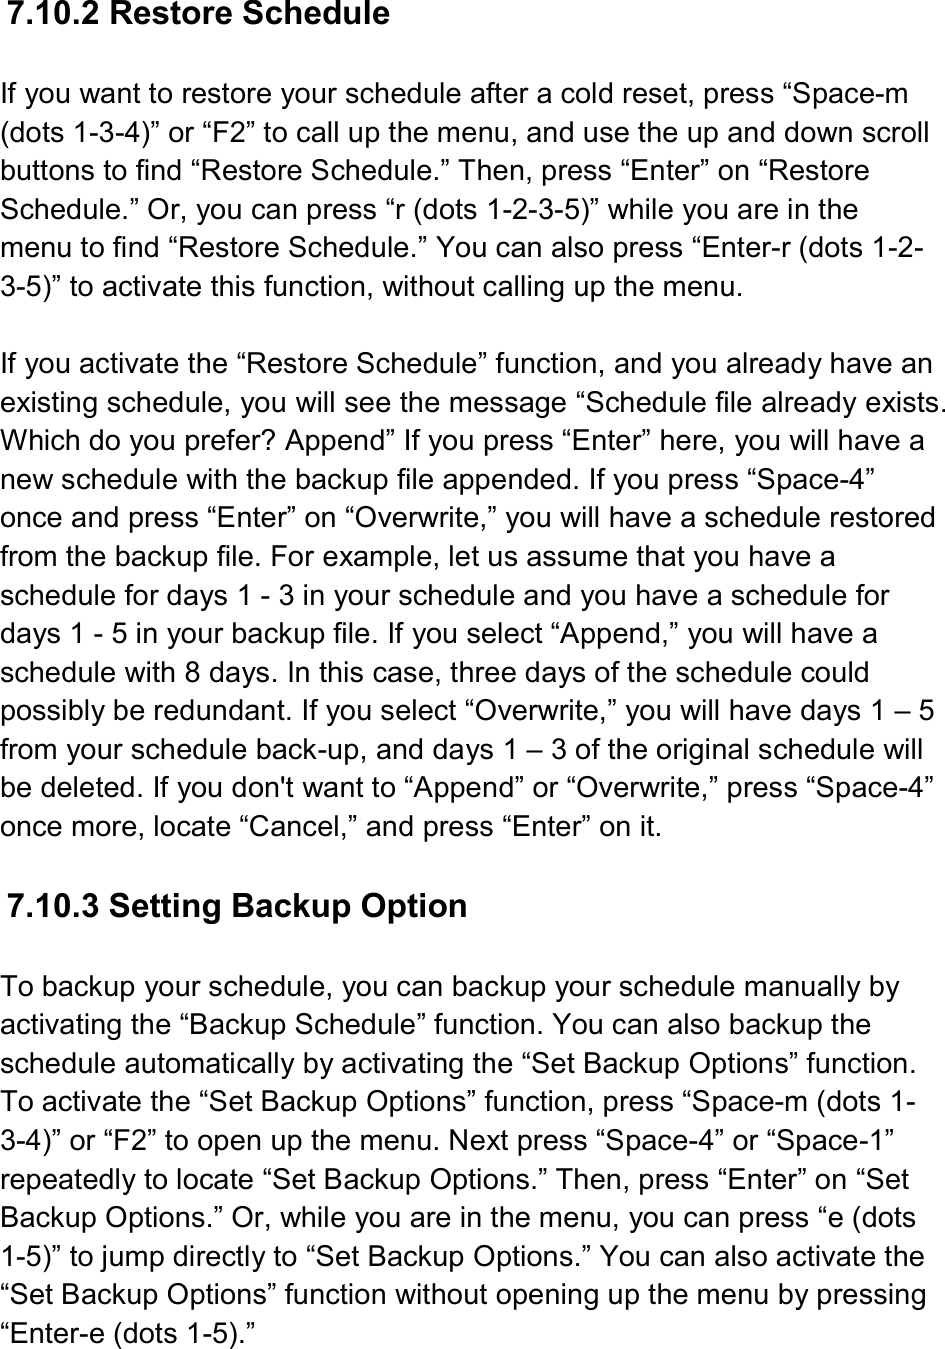   7.10.2 Restore Schedule  If you want to restore your schedule after a cold reset, press “Space-m (dots 1-3-4)” or “F2” to call up the menu, and use the up and down scroll buttons to find “Restore Schedule.” Then, press “Enter” on “Restore Schedule.” Or, you can press “r (dots 1-2-3-5)” while you are in the menu to find “Restore Schedule.” You can also press “Enter-r (dots 1-2-3-5)” to activate this function, without calling up the menu.  If you activate the “Restore Schedule” function, and you already have an existing schedule, you will see the message “Schedule file already exists. Which do you prefer? Append” If you press “Enter” here, you will have a new schedule with the backup file appended. If you press “Space-4” once and press “Enter” on “Overwrite,” you will have a schedule restored from the backup file. For example, let us assume that you have a schedule for days 1 - 3 in your schedule and you have a schedule for days 1 - 5 in your backup file. If you select “Append,” you will have a schedule with 8 days. In this case, three days of the schedule could possibly be redundant. If you select “Overwrite,” you will have days 1 – 5 from your schedule back-up, and days 1 – 3 of the original schedule will be deleted. If you don&apos;t want to “Append” or “Overwrite,” press “Space-4” once more, locate “Cancel,” and press “Enter” on it.  7.10.3 Setting Backup Option  To backup your schedule, you can backup your schedule manually by activating the “Backup Schedule” function. You can also backup the schedule automatically by activating the “Set Backup Options” function. To activate the “Set Backup Options” function, press “Space-m (dots 1-3-4)” or “F2” to open up the menu. Next press “Space-4” or “Space-1” repeatedly to locate “Set Backup Options.” Then, press “Enter” on “Set Backup Options.” Or, while you are in the menu, you can press “e (dots 1-5)” to jump directly to “Set Backup Options.” You can also activate the “Set Backup Options” function without opening up the menu by pressing “Enter-e (dots 1-5).” 